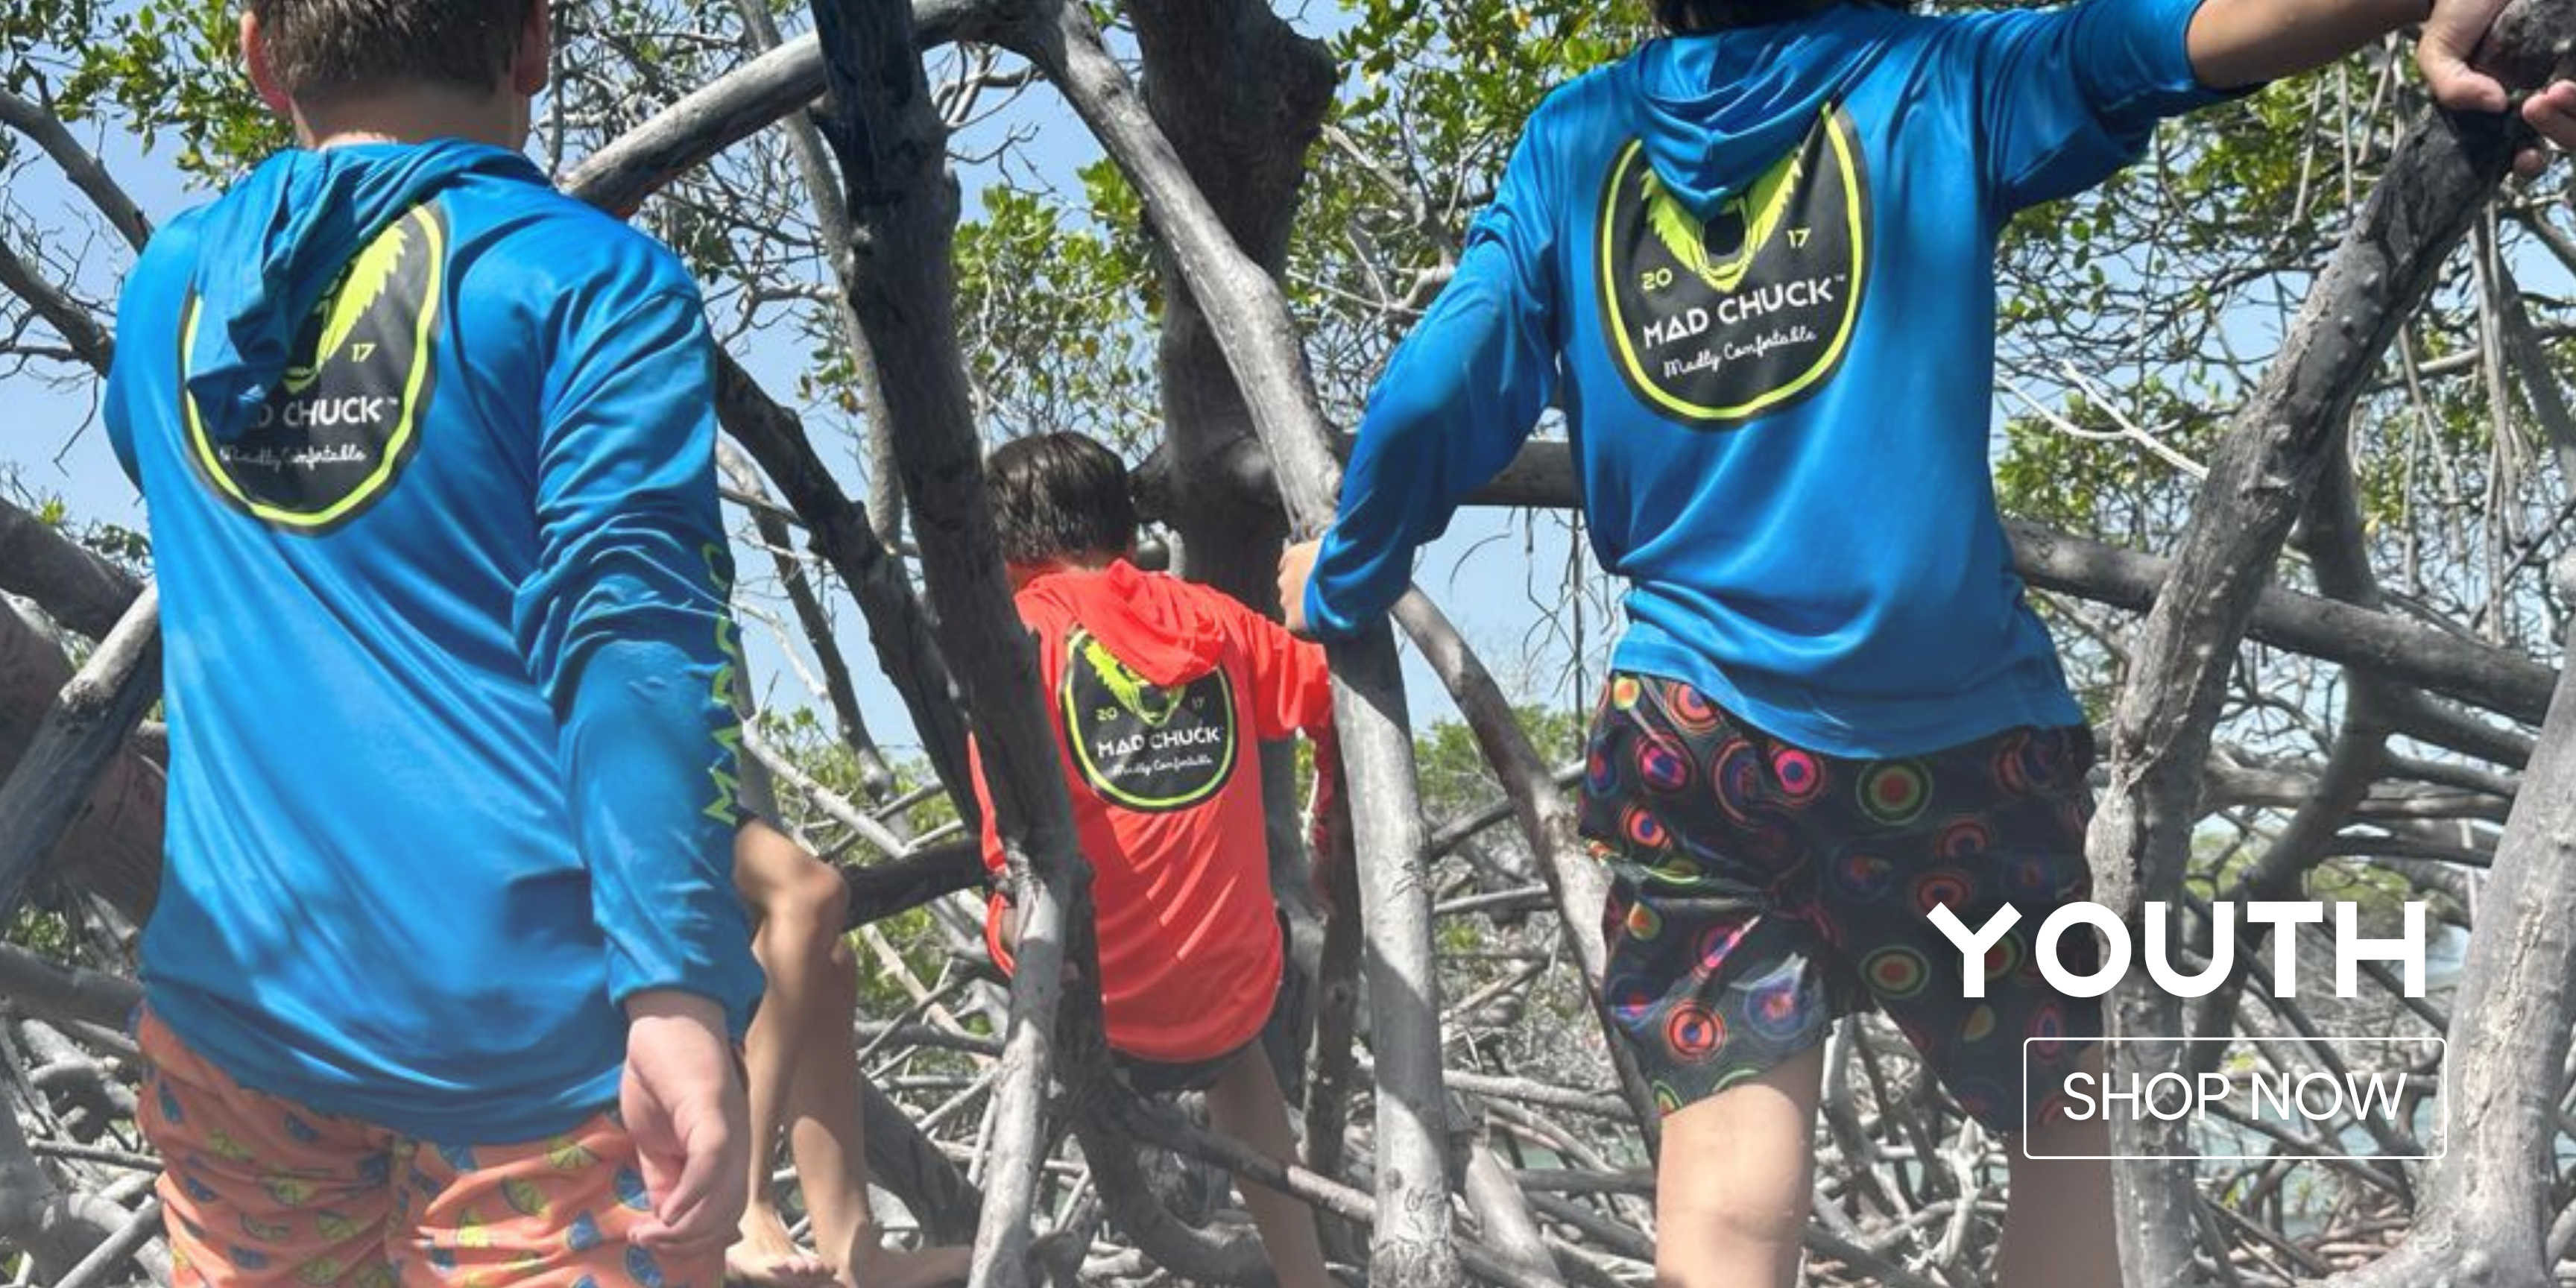 Youth Collection: Two youths wearing "Mad Chuck" Rashguards, climbing on tree branches. Click to browse Youth Collection